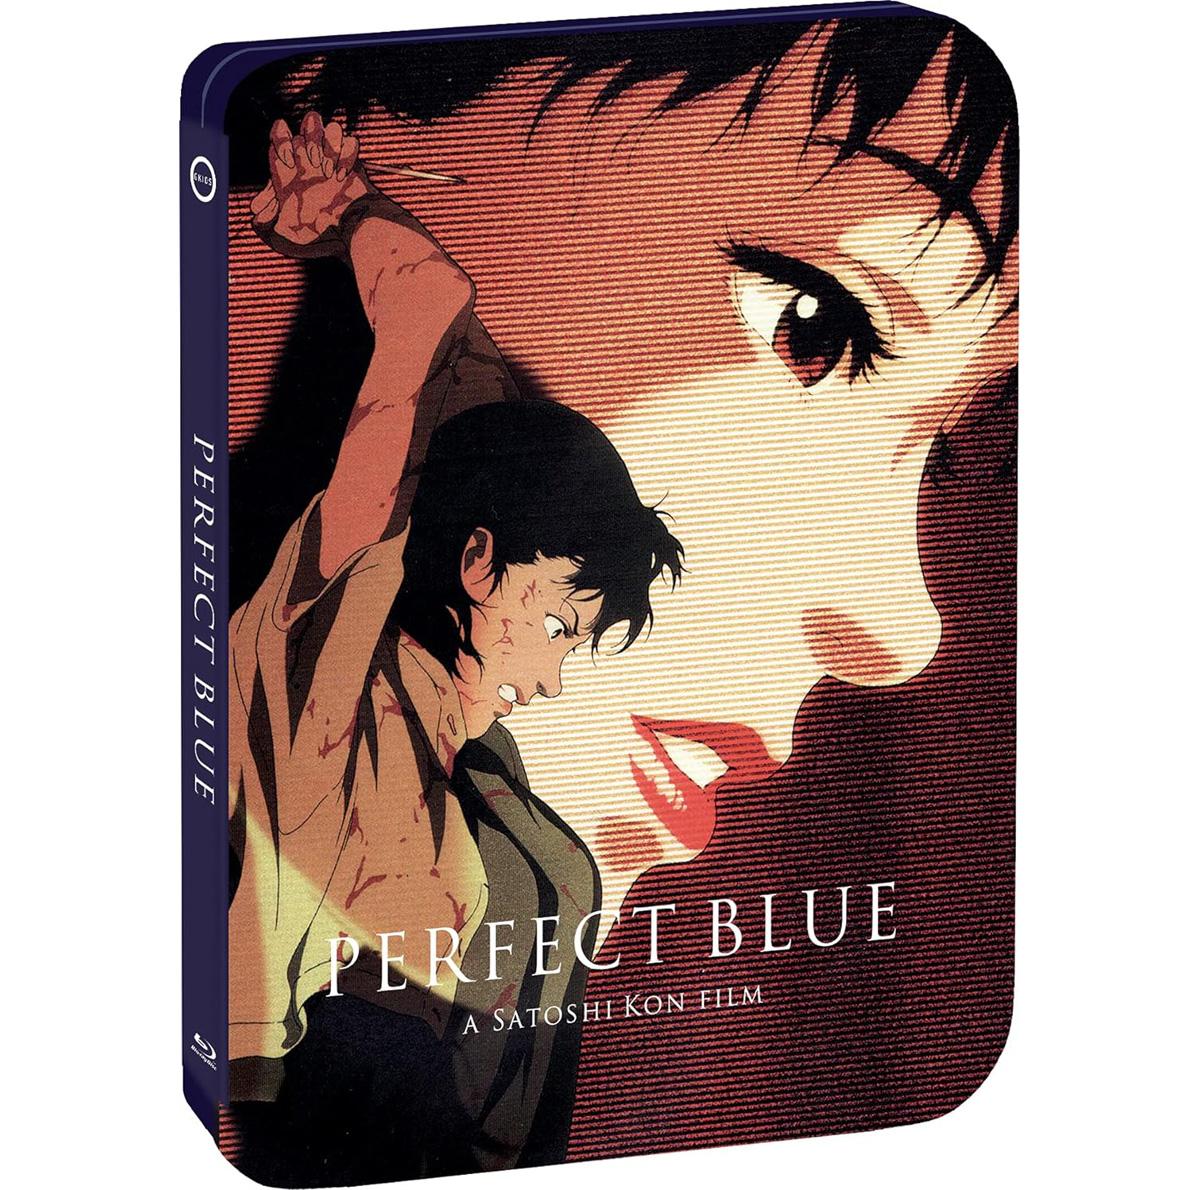 Perfect Blue Limited Edition Steelbook Blu-ray + DVD for $17.99